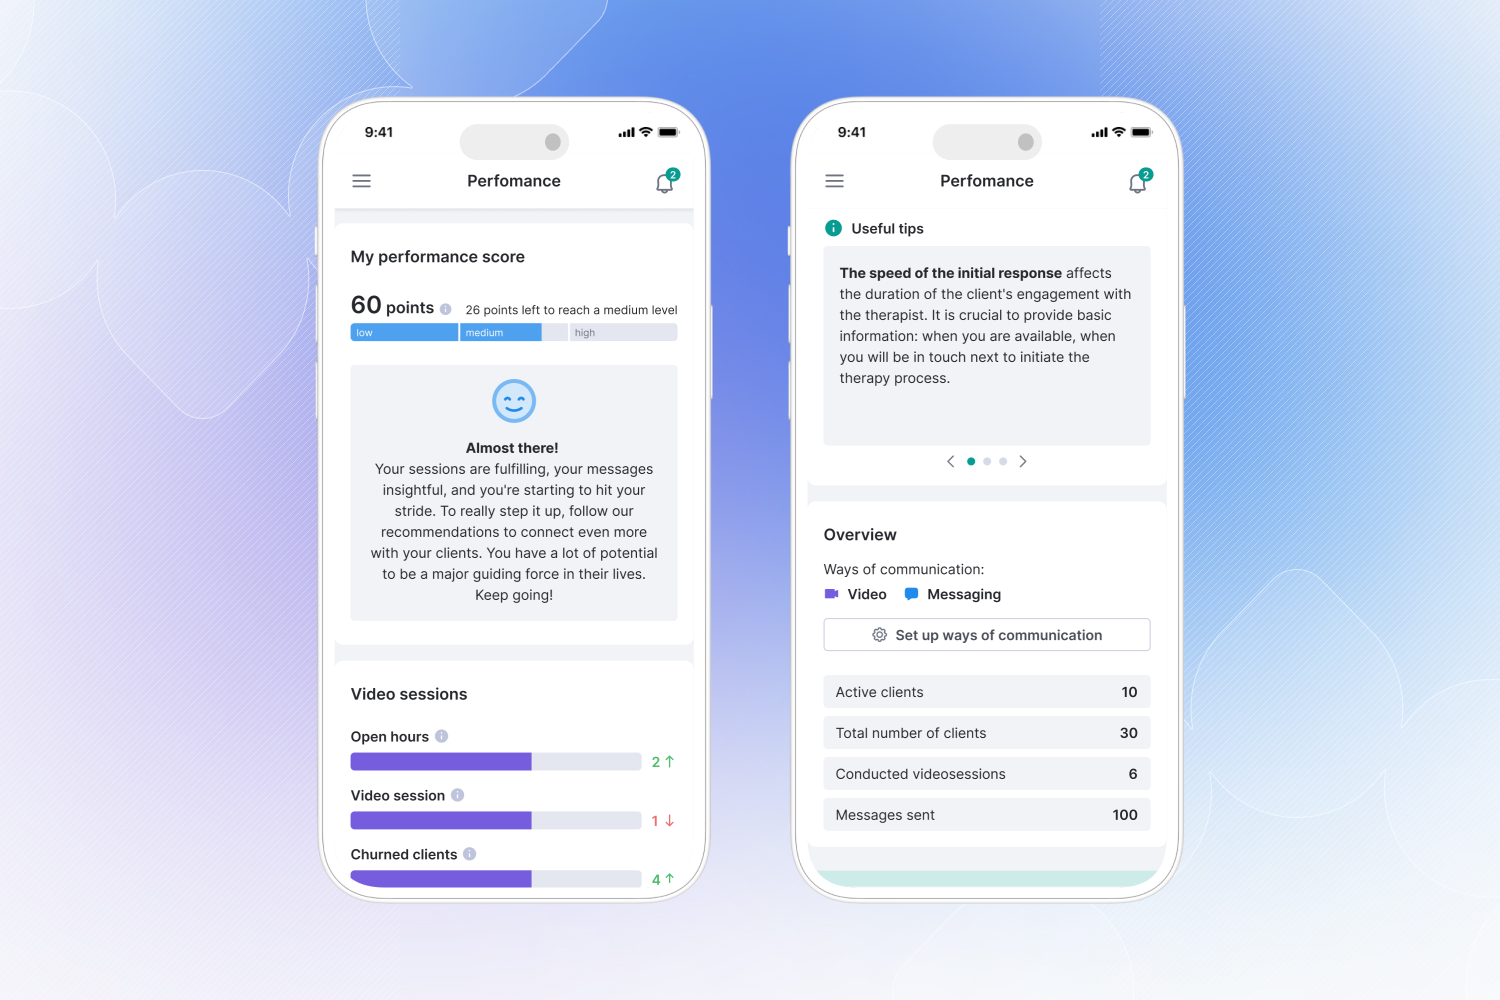 Calmerry is introducing the Performance System for mental health professionals. There are screenshots from an app to track your mental health.